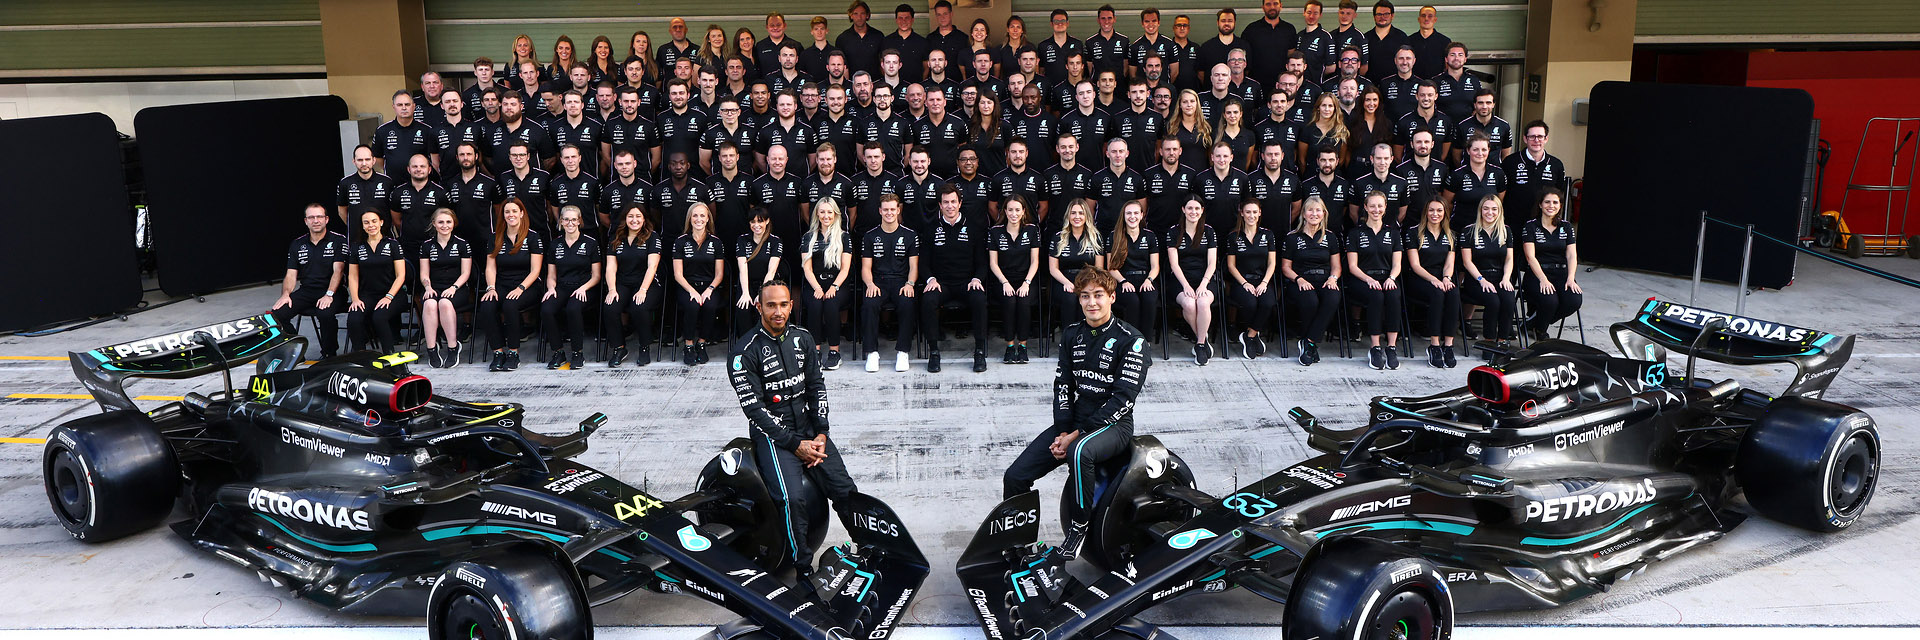 Lewis Hamilton, George Russell and the Mercedes F1 team